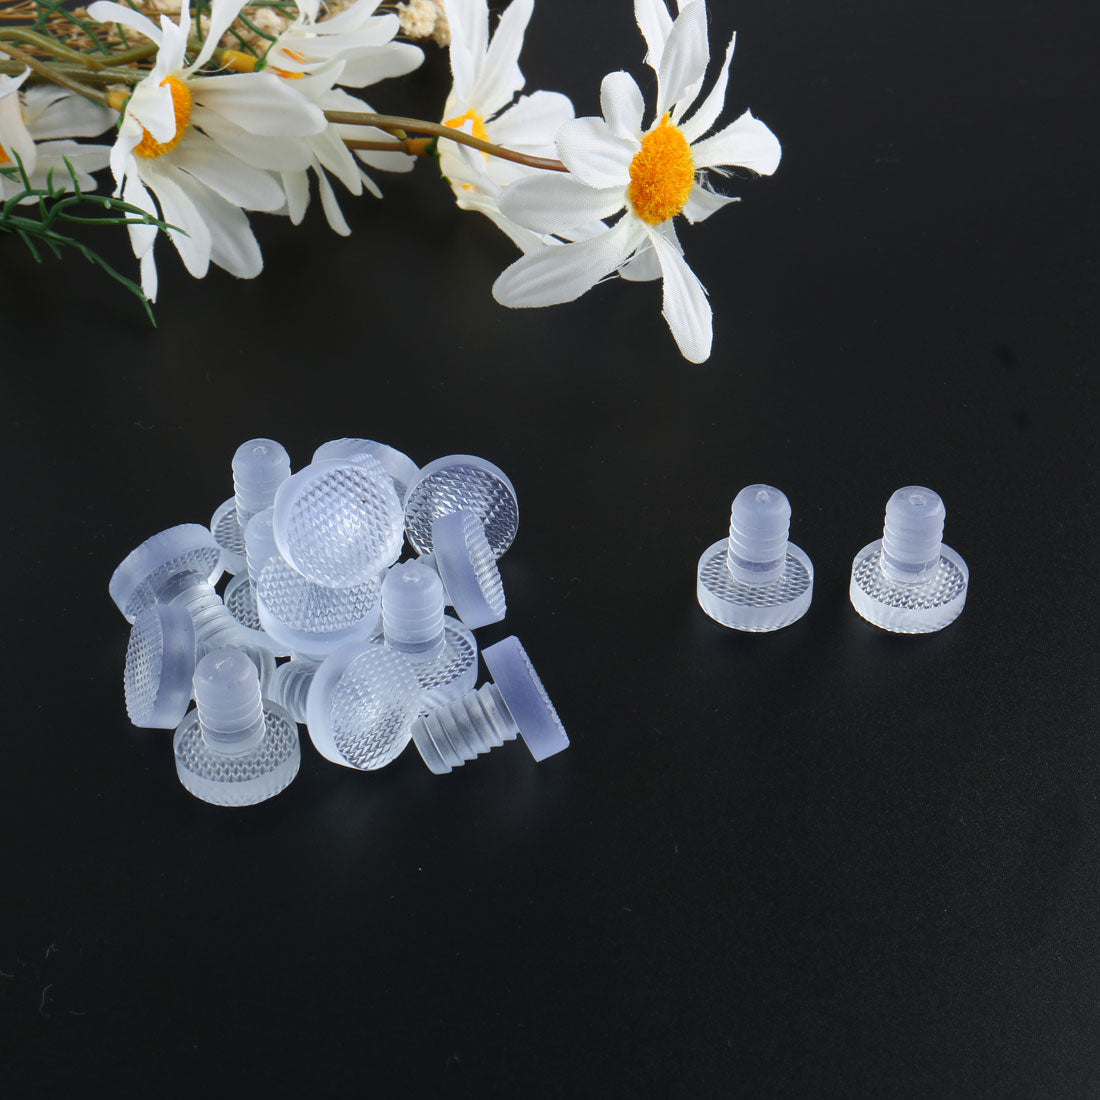 uxcell Uxcell 16pcs 8mm Clear Stem Bumpers Glide, Patio Outdoor Furniture Glass Desk Top